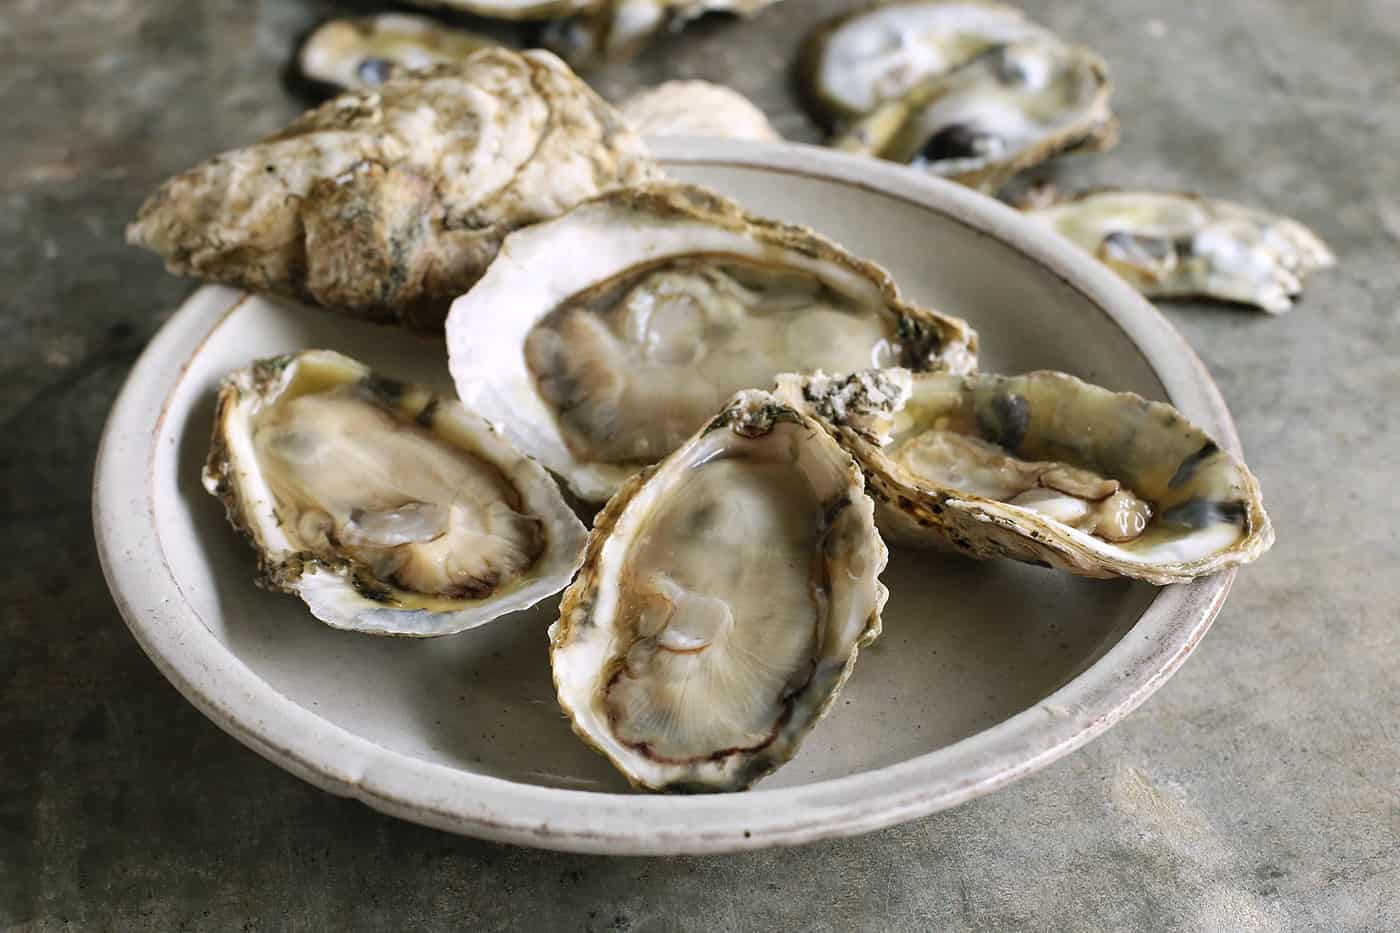 A plate of fresh oysters in their shells